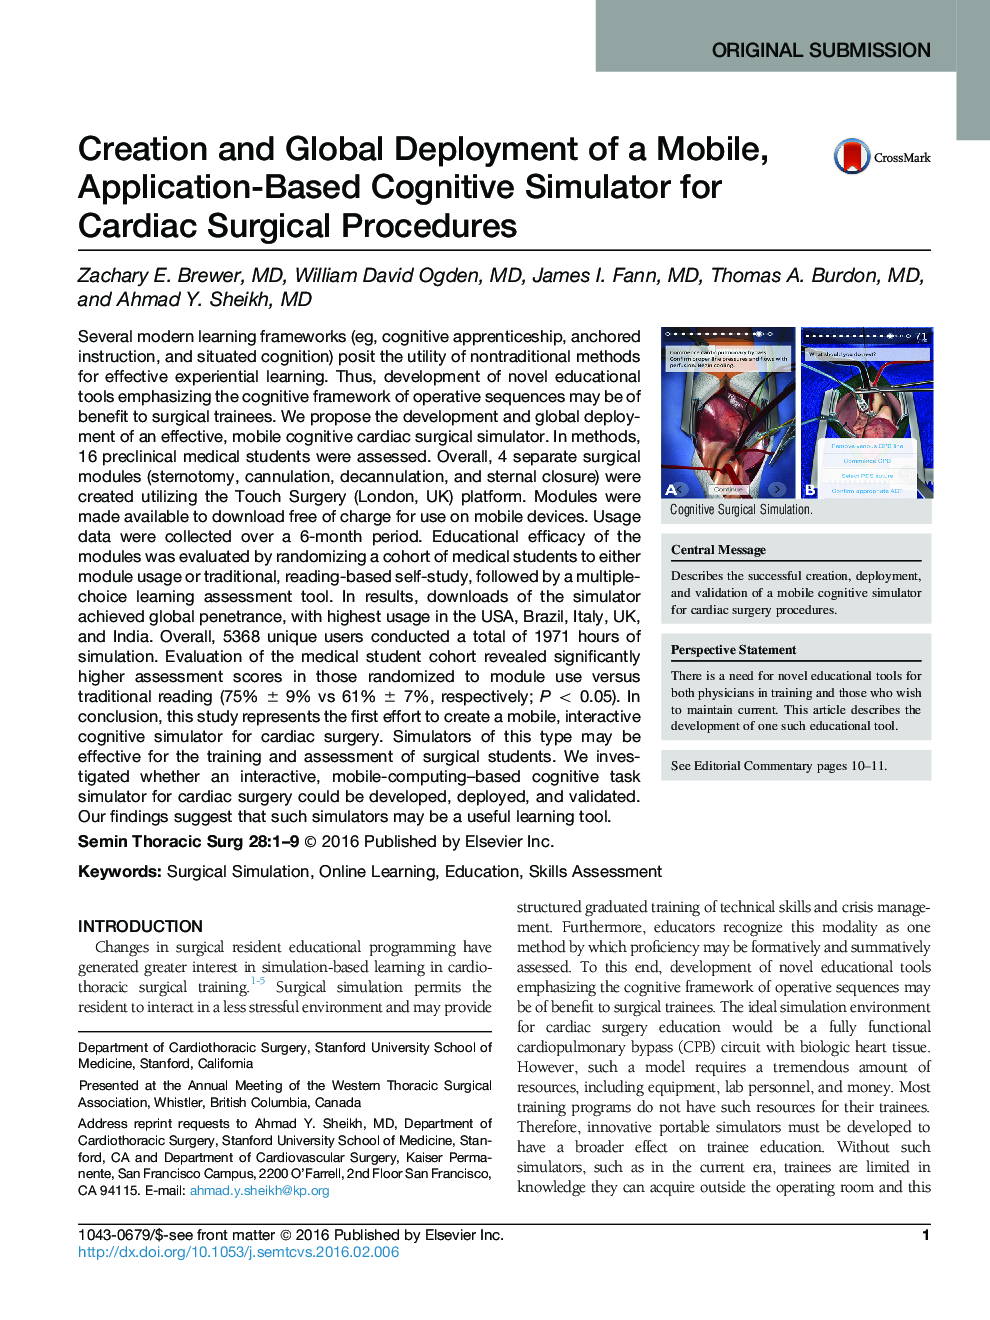 Original SubmissionCreation and Global Deployment of a Mobile, Application-Based Cognitive Simulator for Cardiac Surgical Procedures